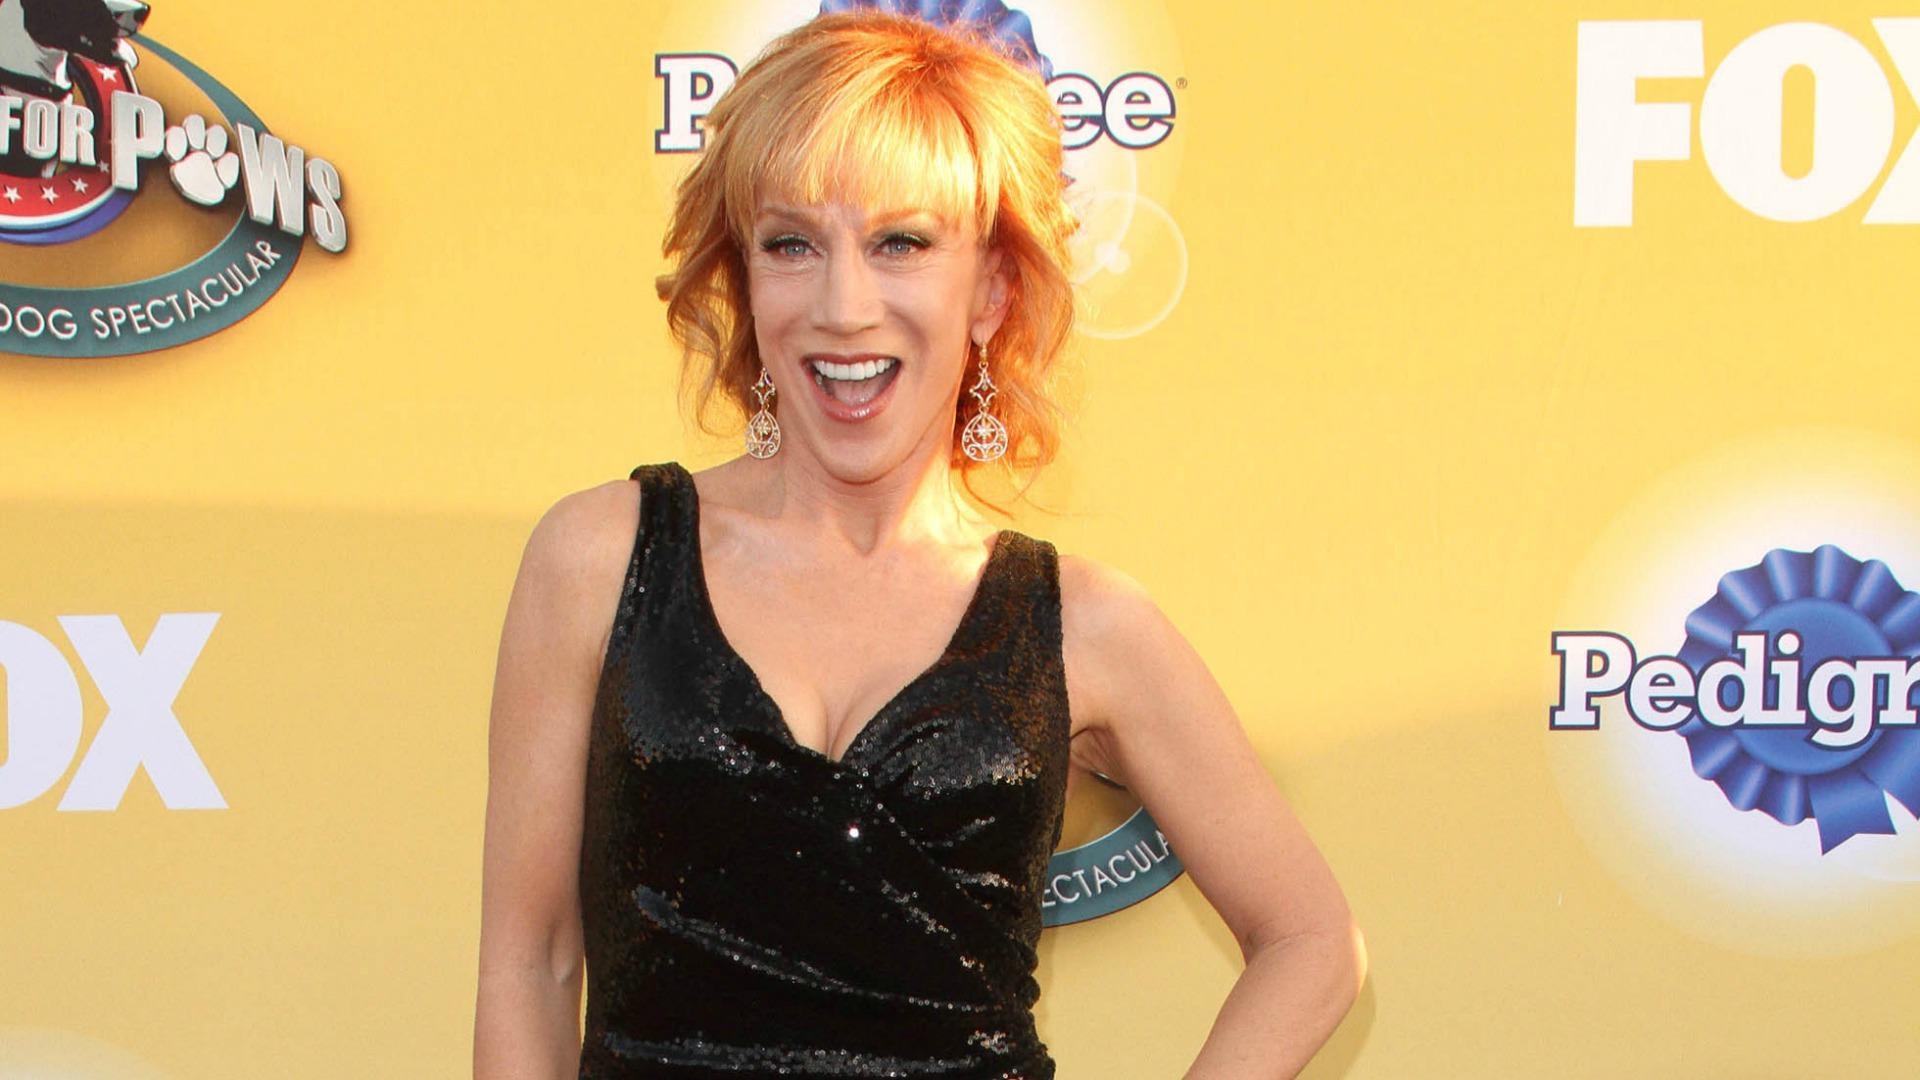 Kathy Griffin: The 2015 “Fashion Police”, Light-hearted fashion commentary show. 1920x1080 Full HD Background.